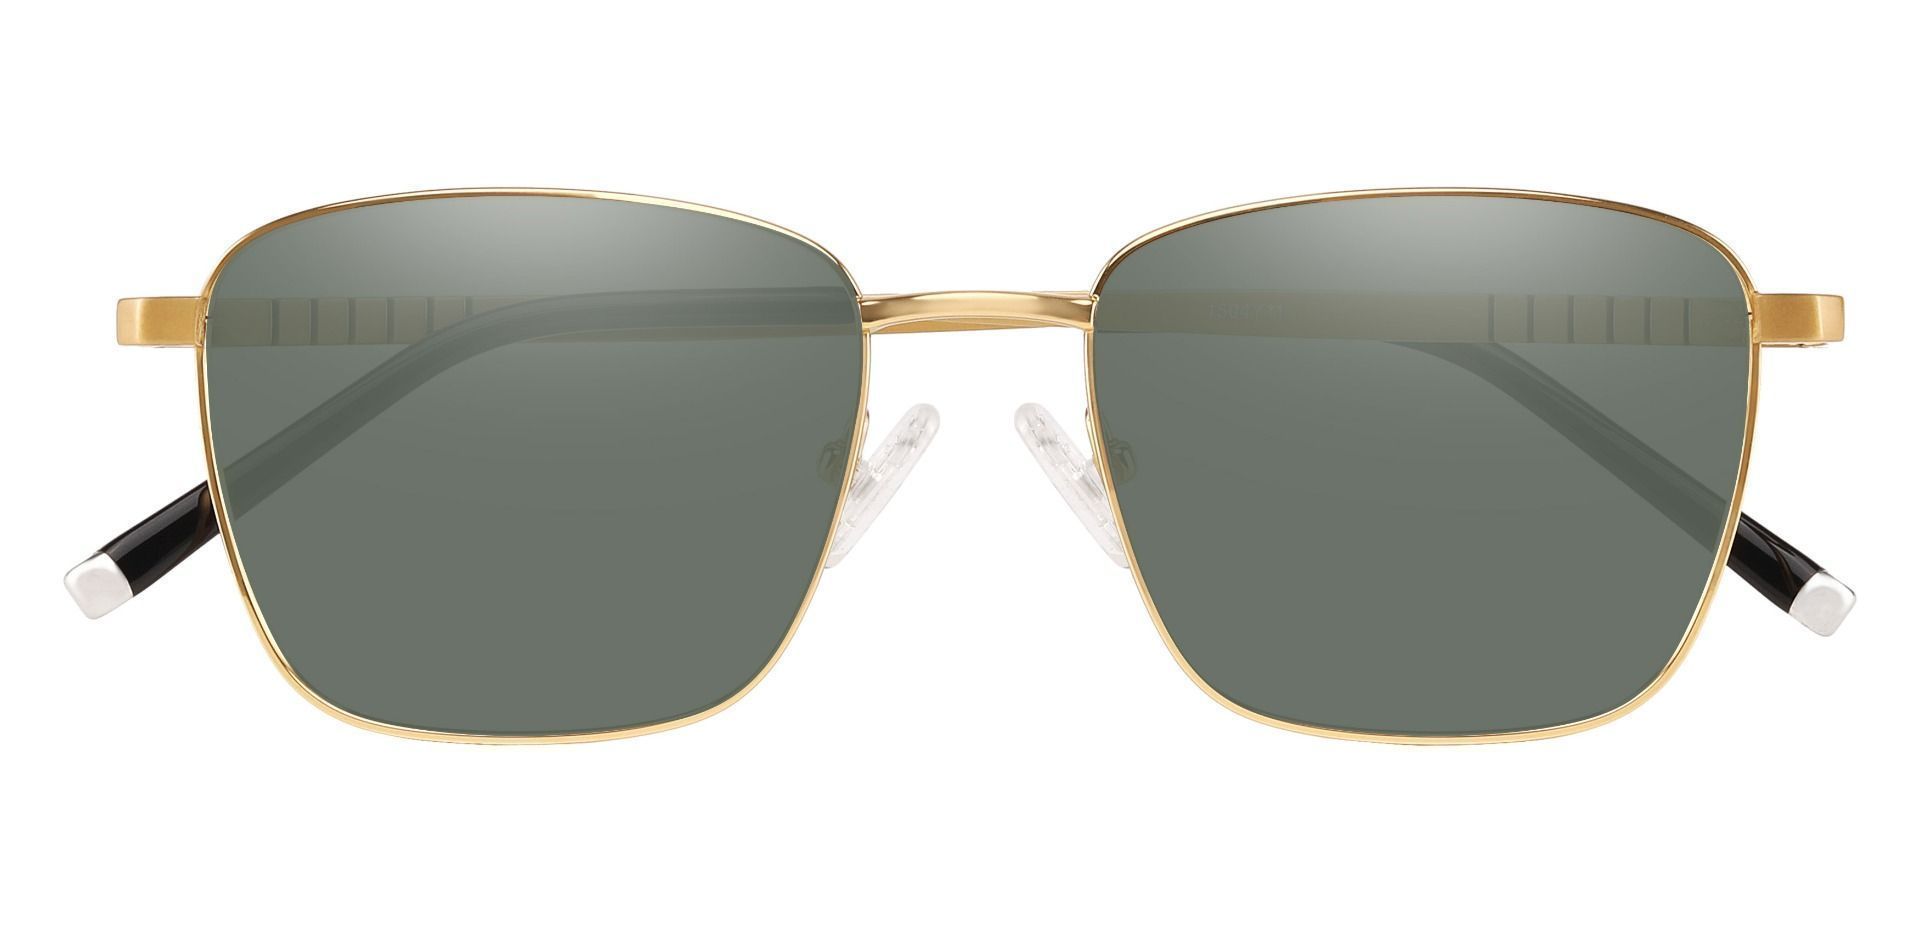 May Square Progressive Sunglasses - Gold Frame With Green Lenses